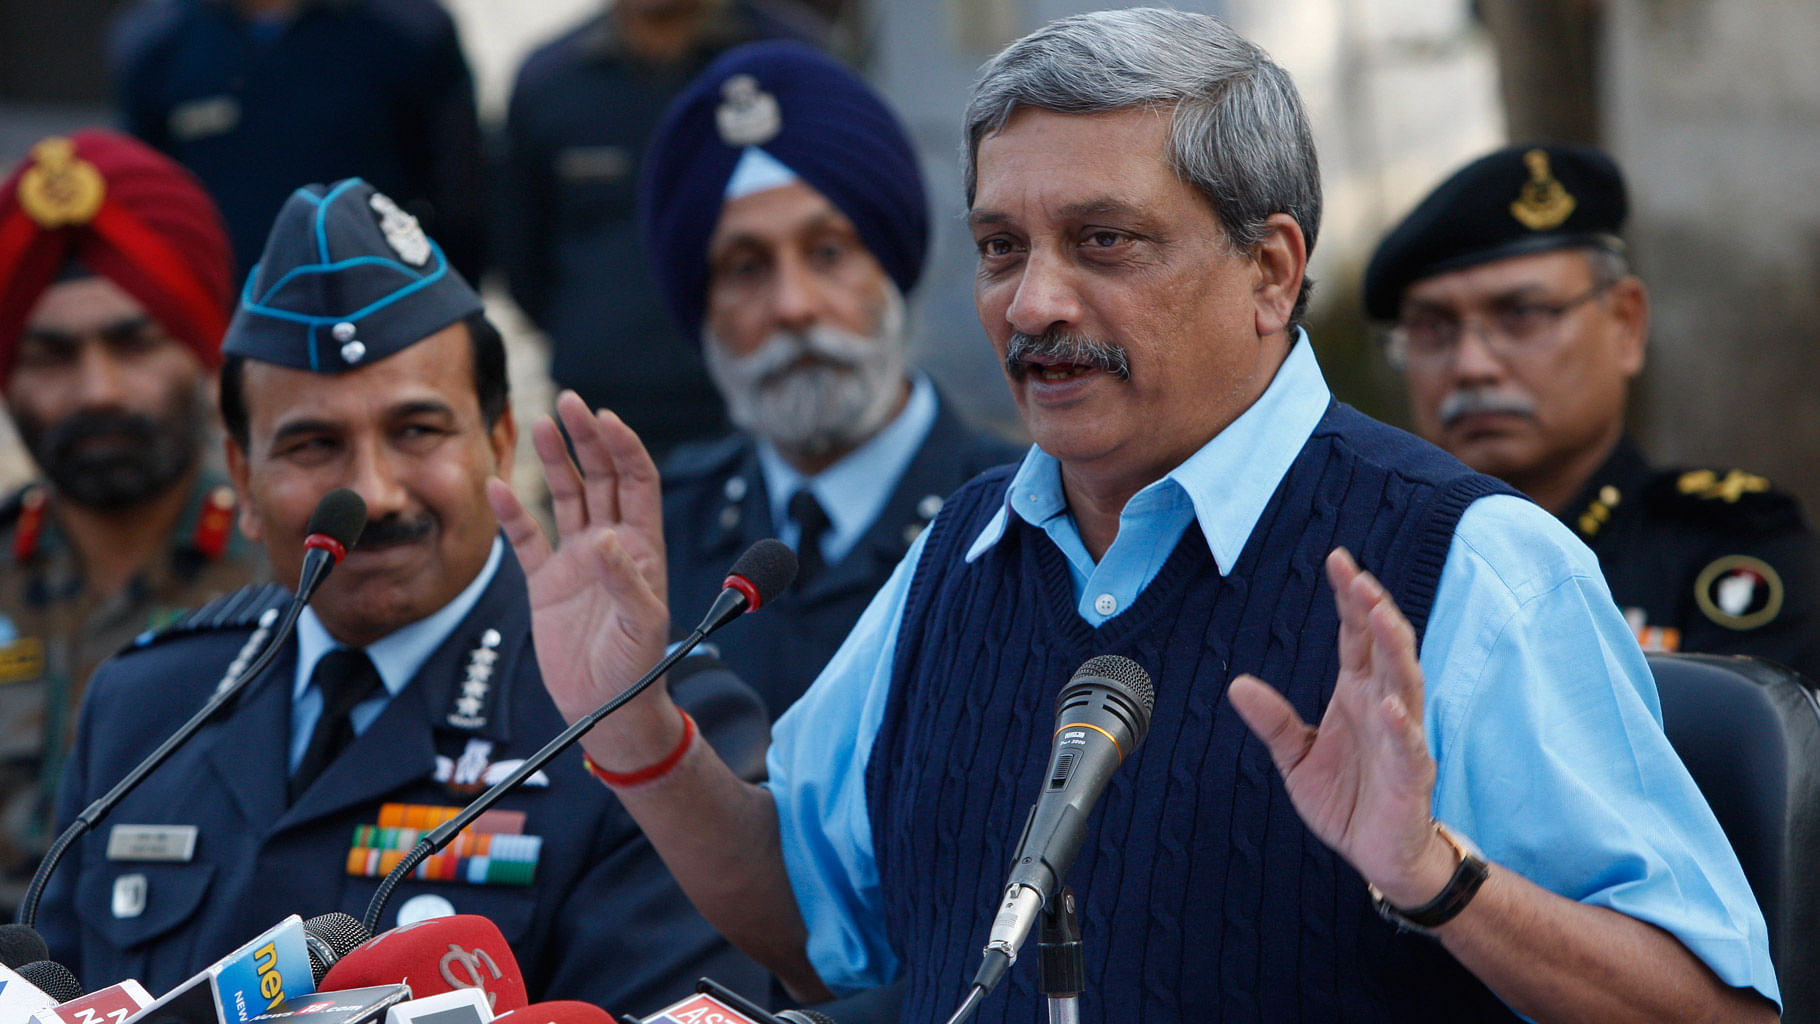  Defence Minister, Manohar Parrikar addresses the media at the Indian air force base in Pathankot, Tuesday,5 January, 2016. (Photo: AP)